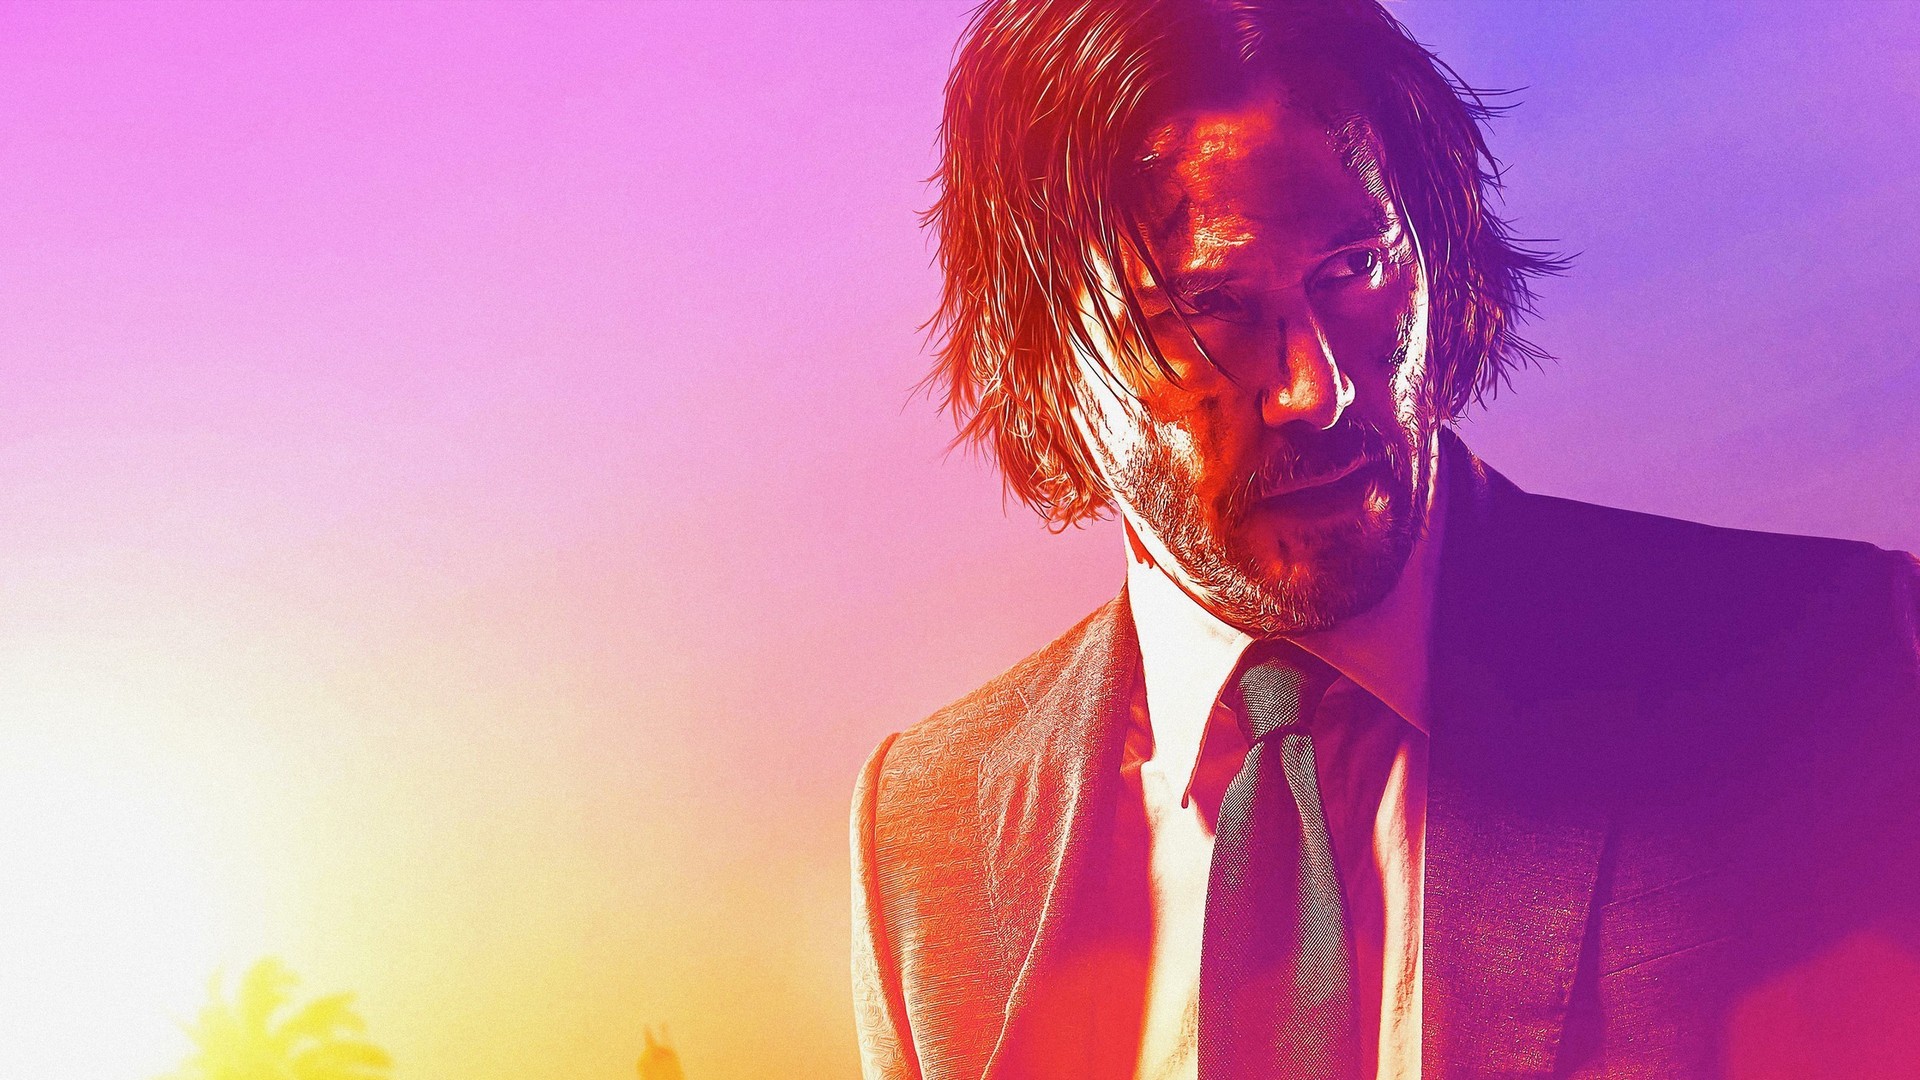 John Wick Chapter 3 Parabellum Wallpaper HD with high-resolution 1920x1080 pixel. You can use this poster wallpaper for your Desktop Computers, Mac Screensavers, Windows Backgrounds, iPhone Wallpapers, Tablet or Android Lock screen and another Mobile device